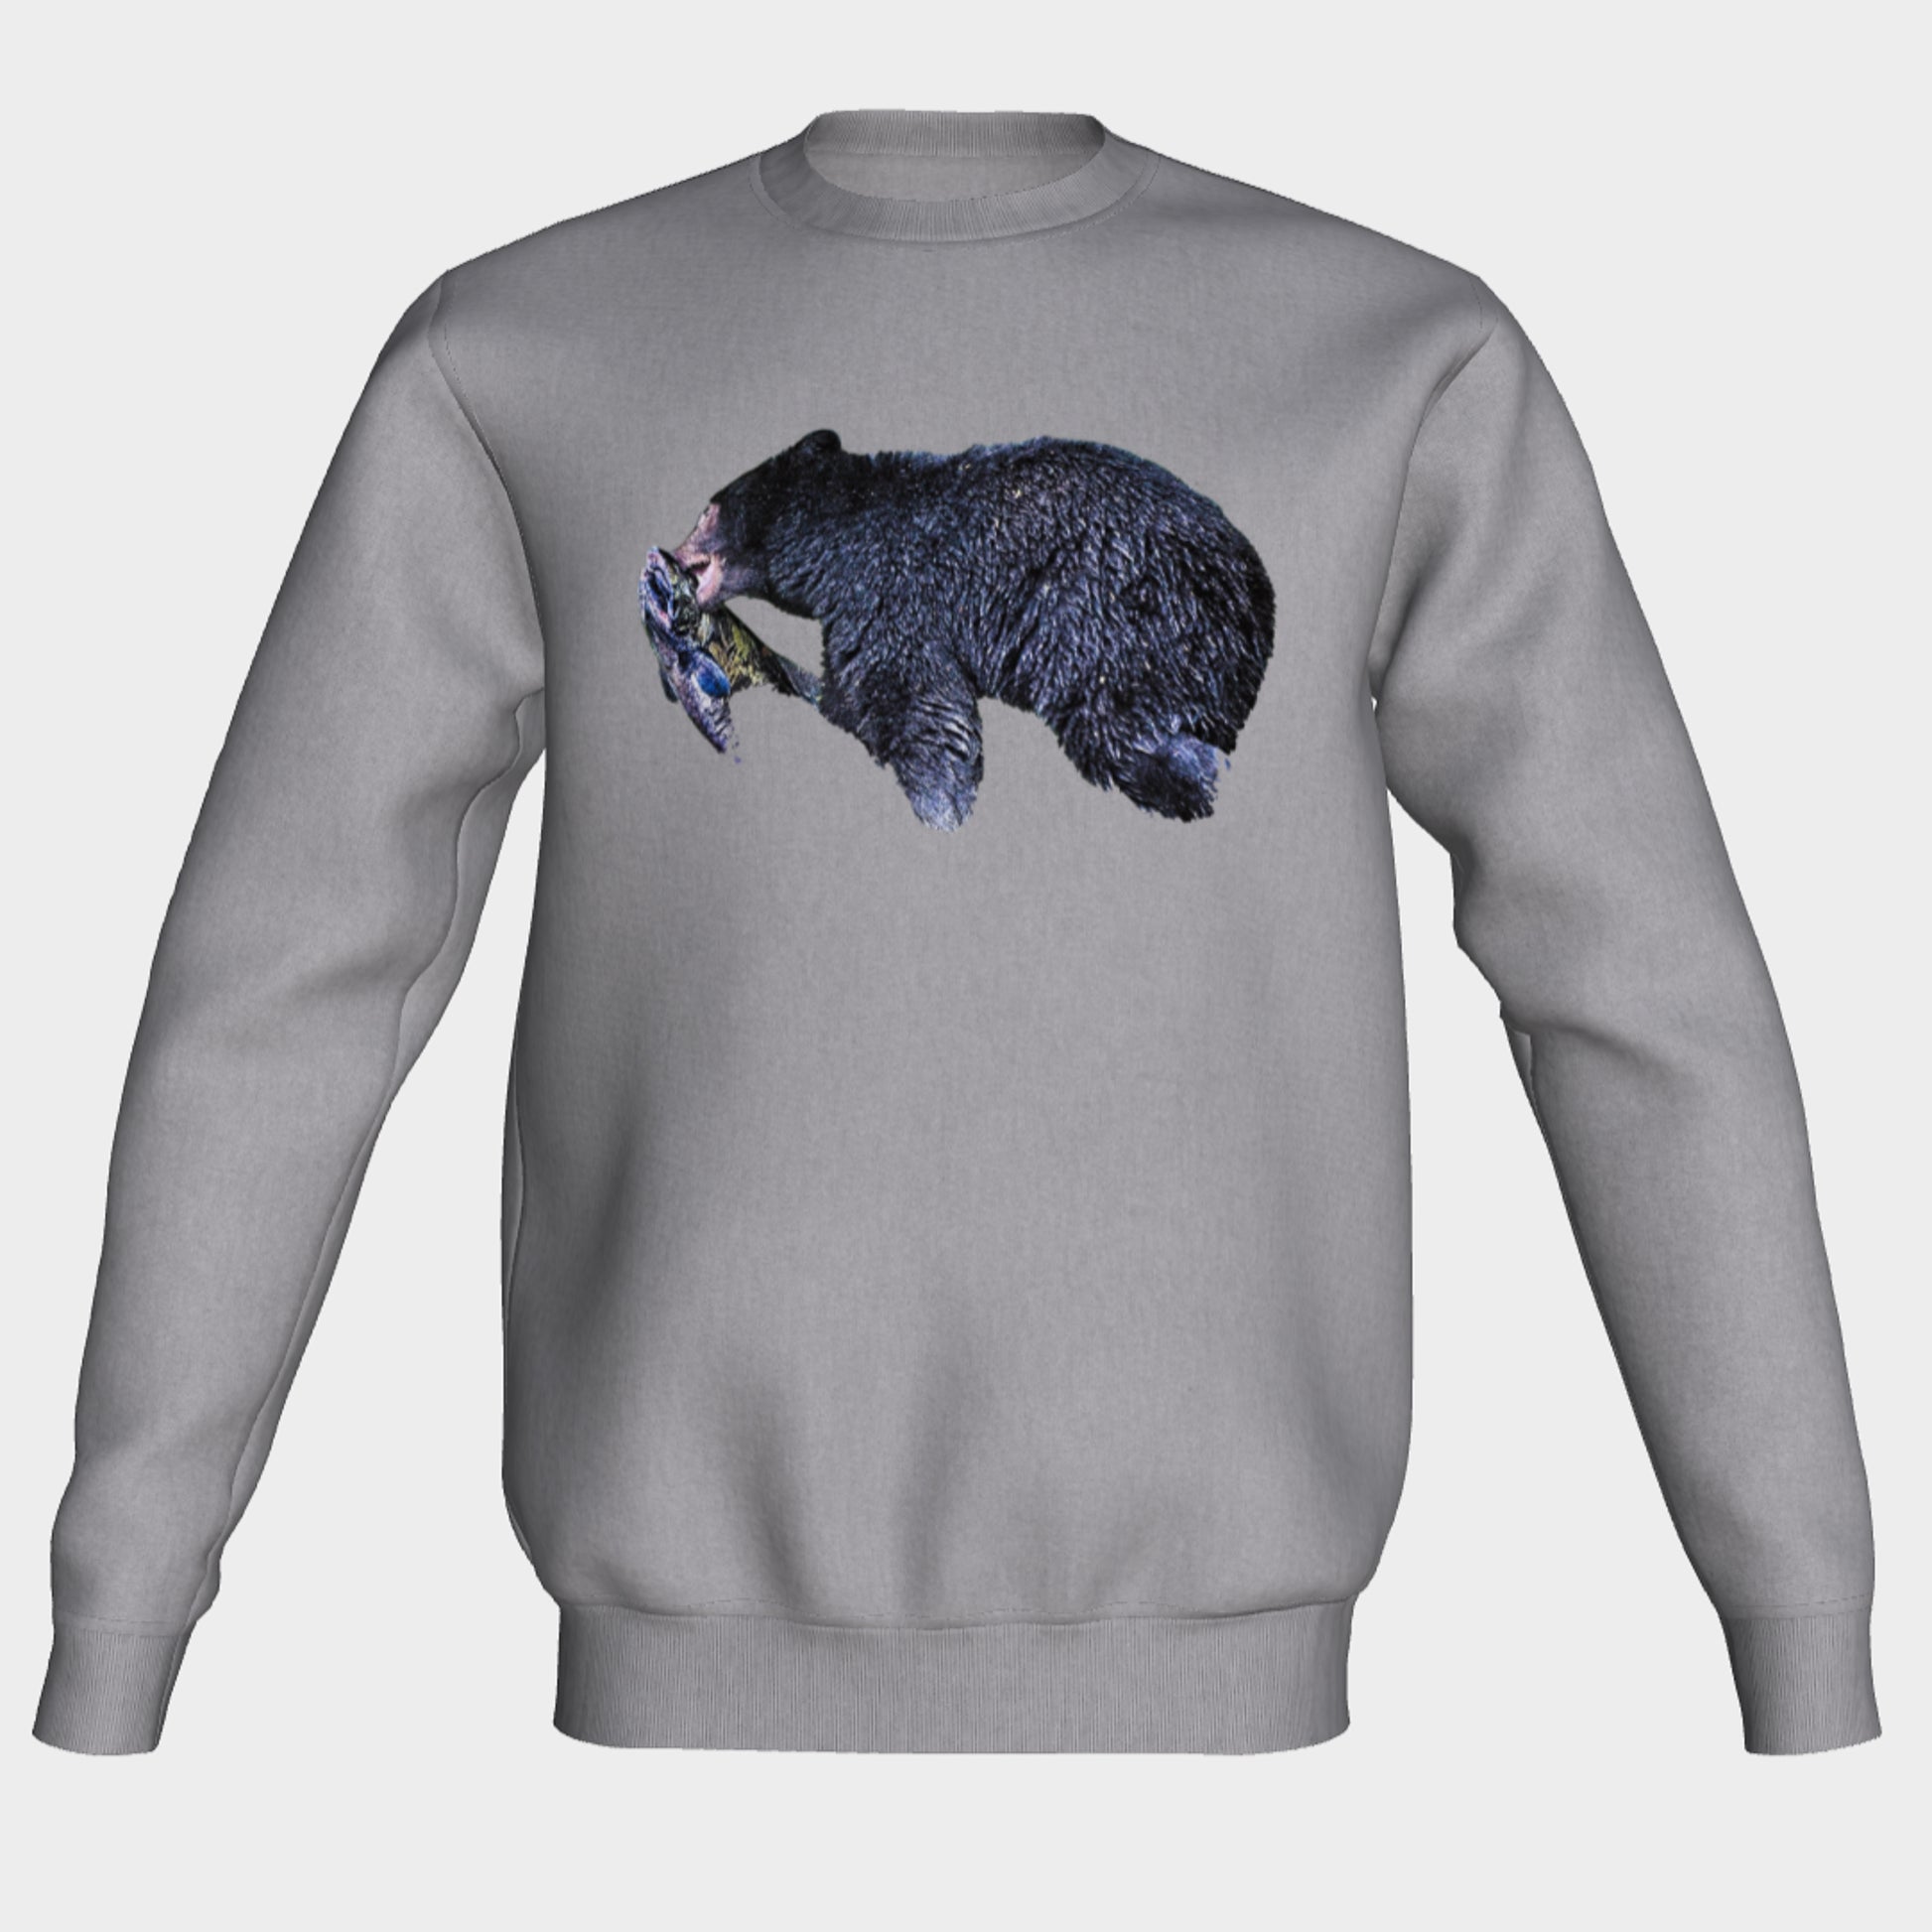 Salmon Seeker Crewneck Sweatshirt What’s better than a super cozy sweatshirt? A super cozy sweatshirt from Van Isle Goddess!  Super cozy unisex sweatshirt for those chilly days.  Excellent for men or women.   Fit is roomy and comfortable. 